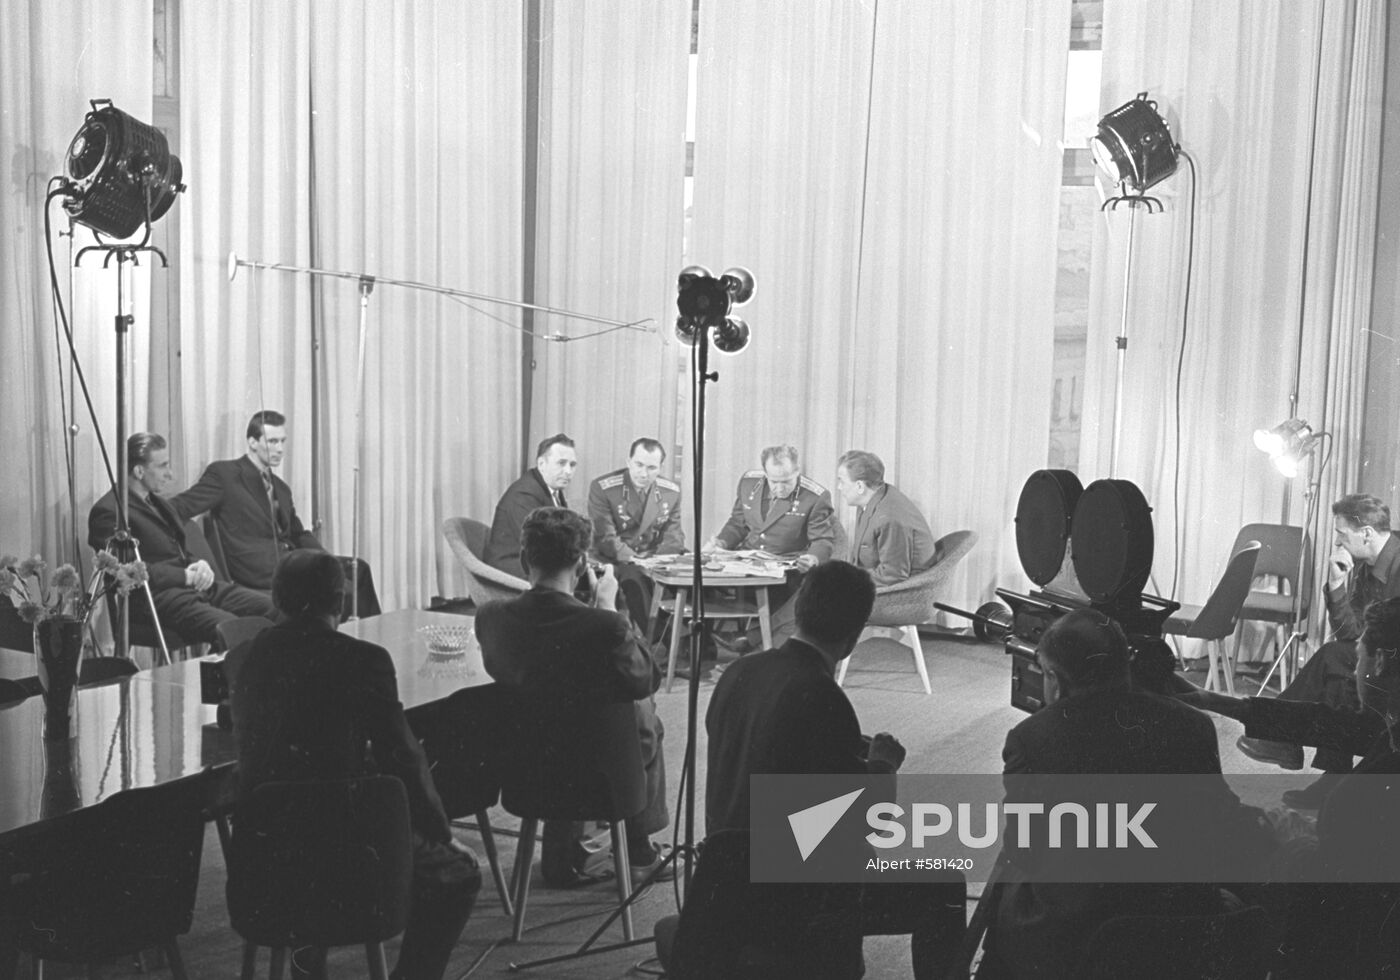 Soviet cosmonauts at news conference